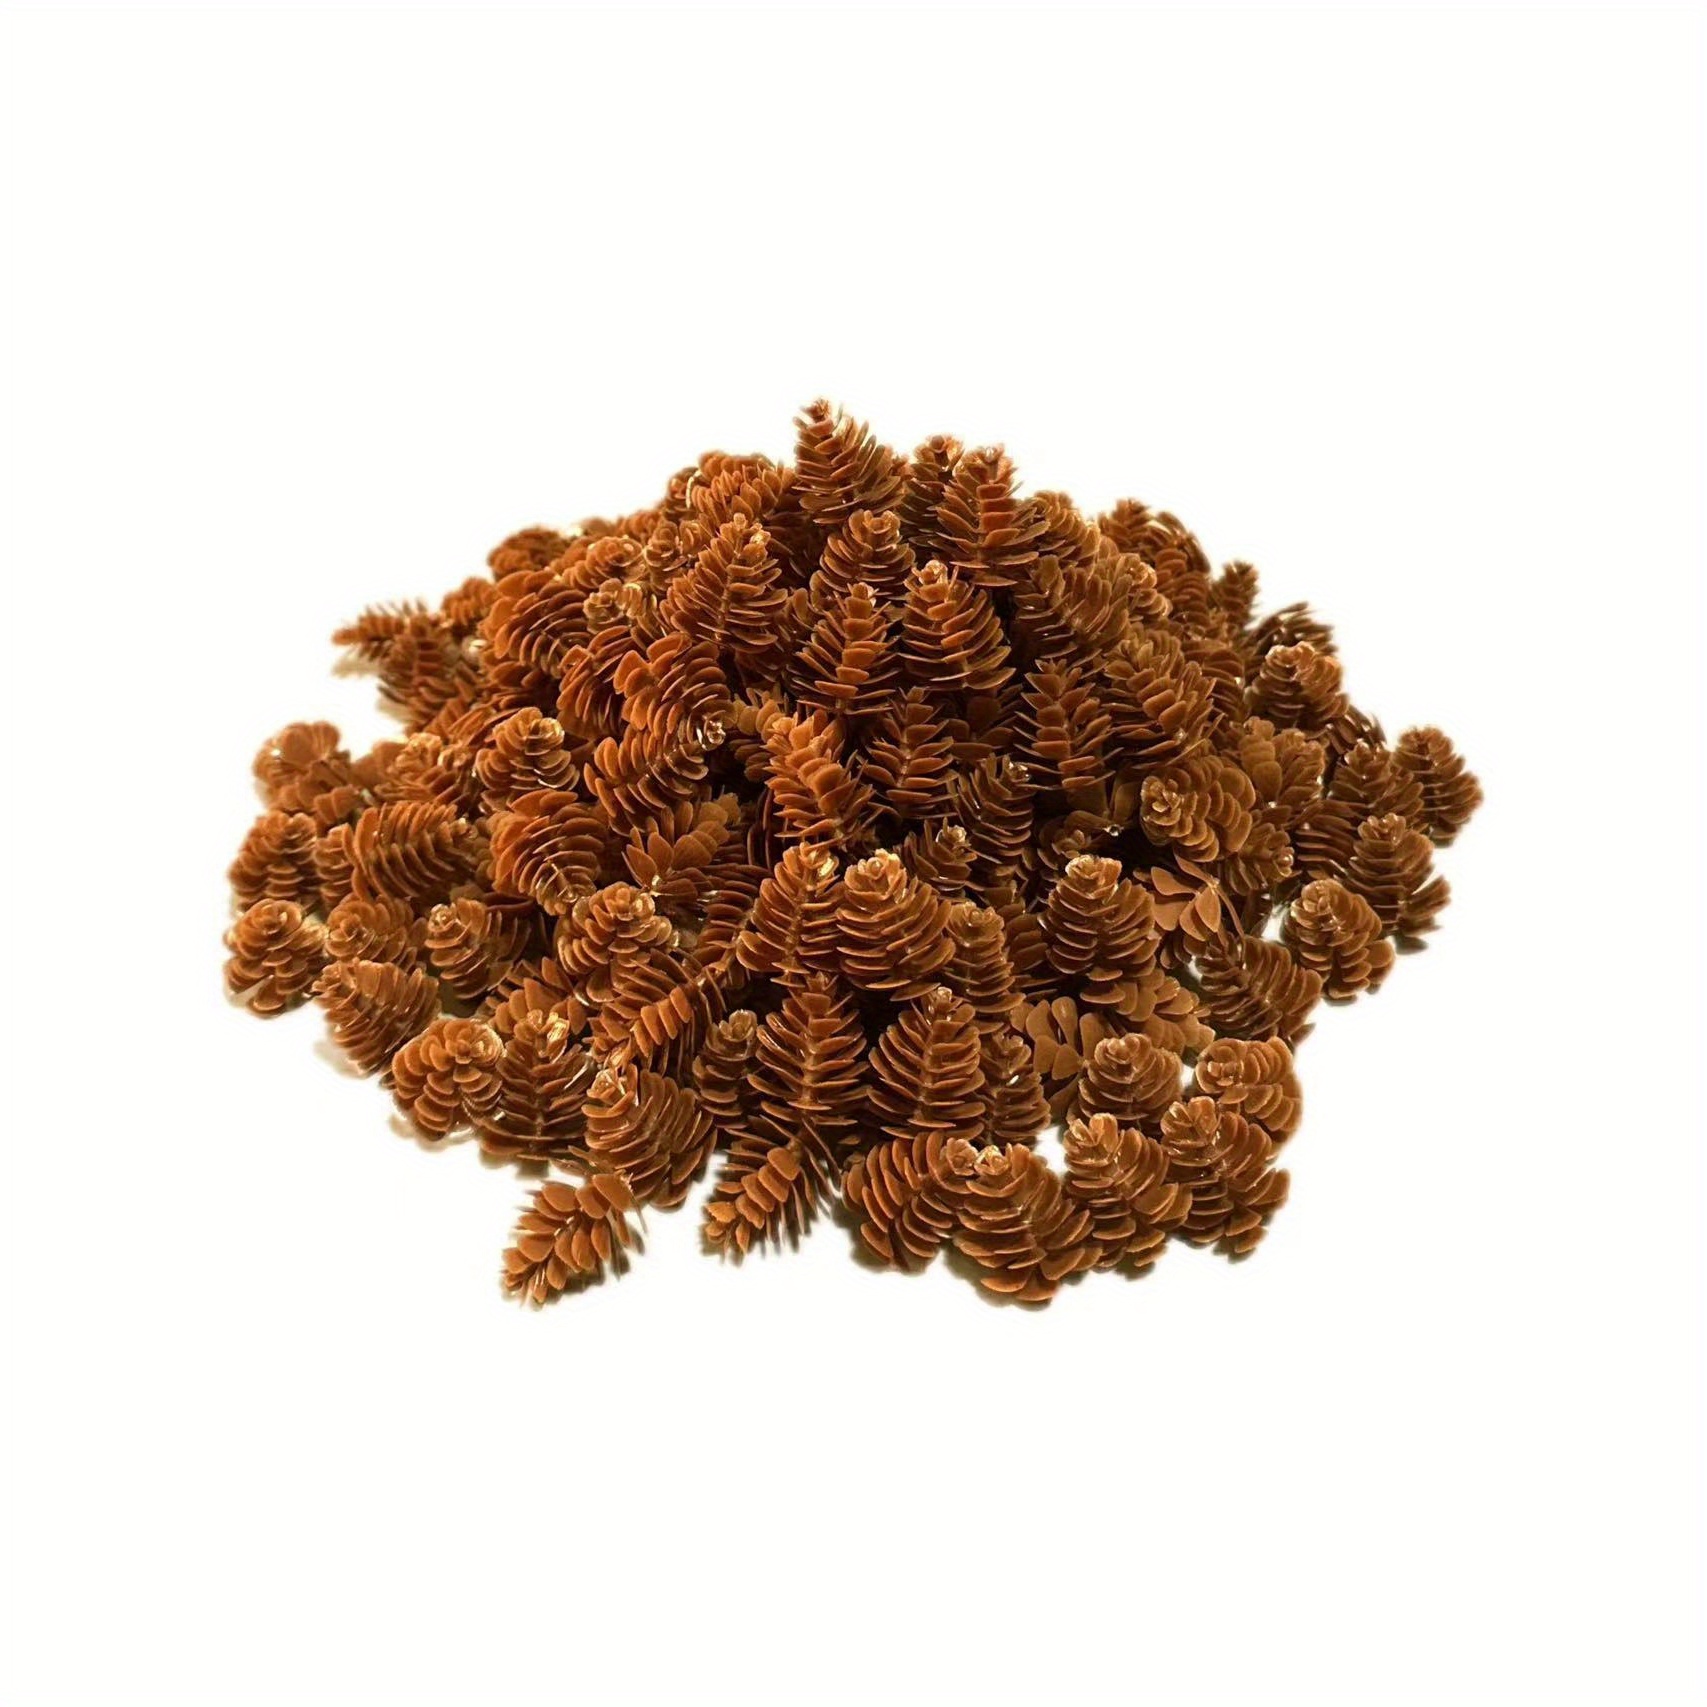 

100pcs Artificial Topiaries Pine, 75.8g About 100 Mini Pine Cones-diy Crafts, Home And Wedding Decorations-autumn And Christmas Decorations, Home Decor, Home Supplies